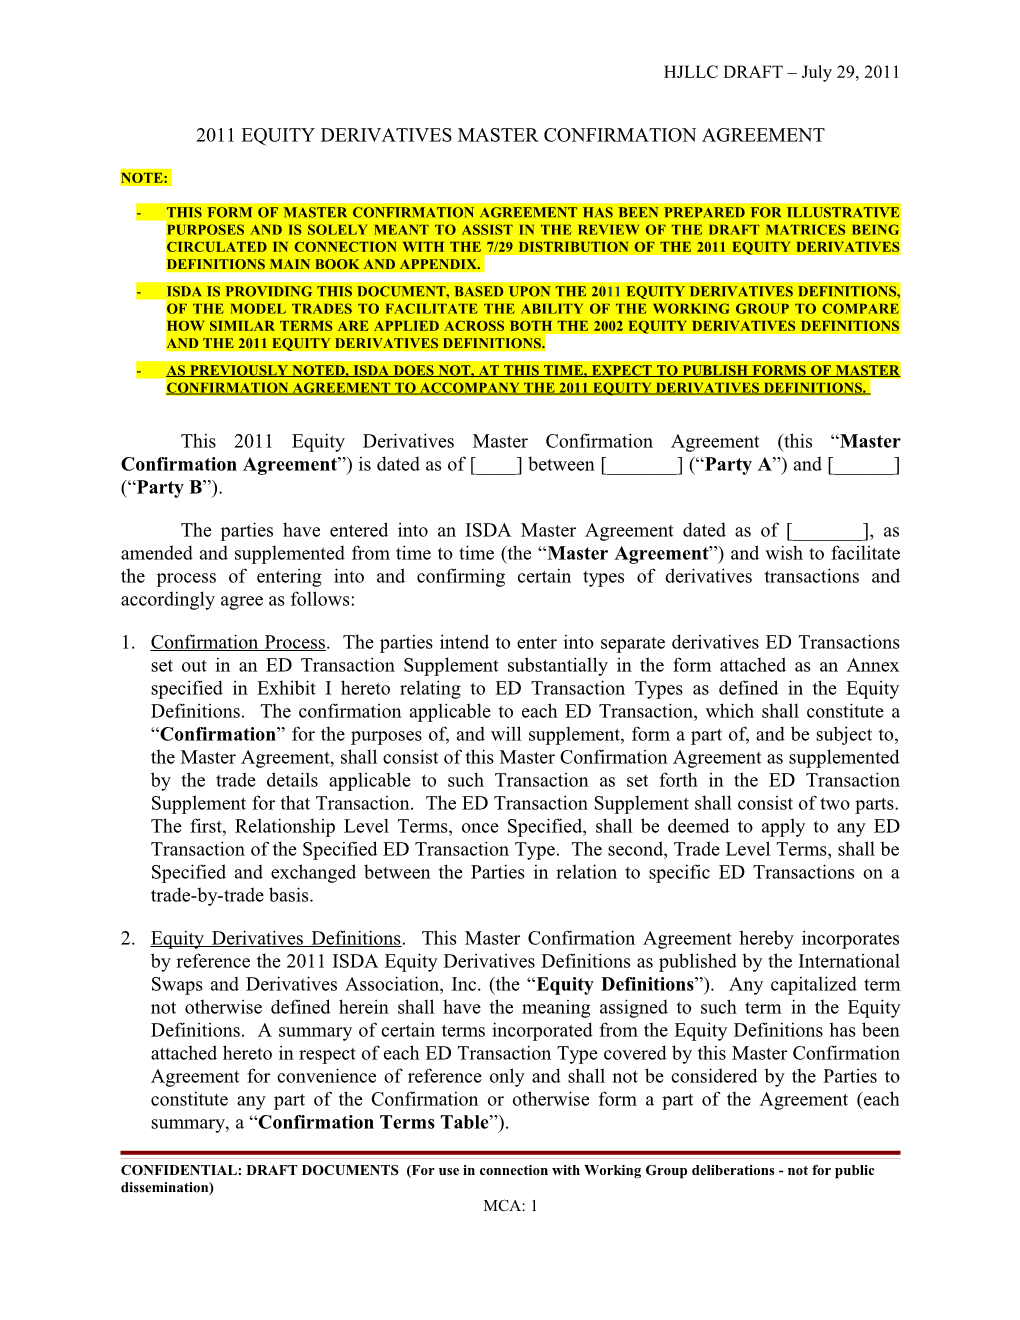 2011 Equity Derivatives Master Confirmation Agreement